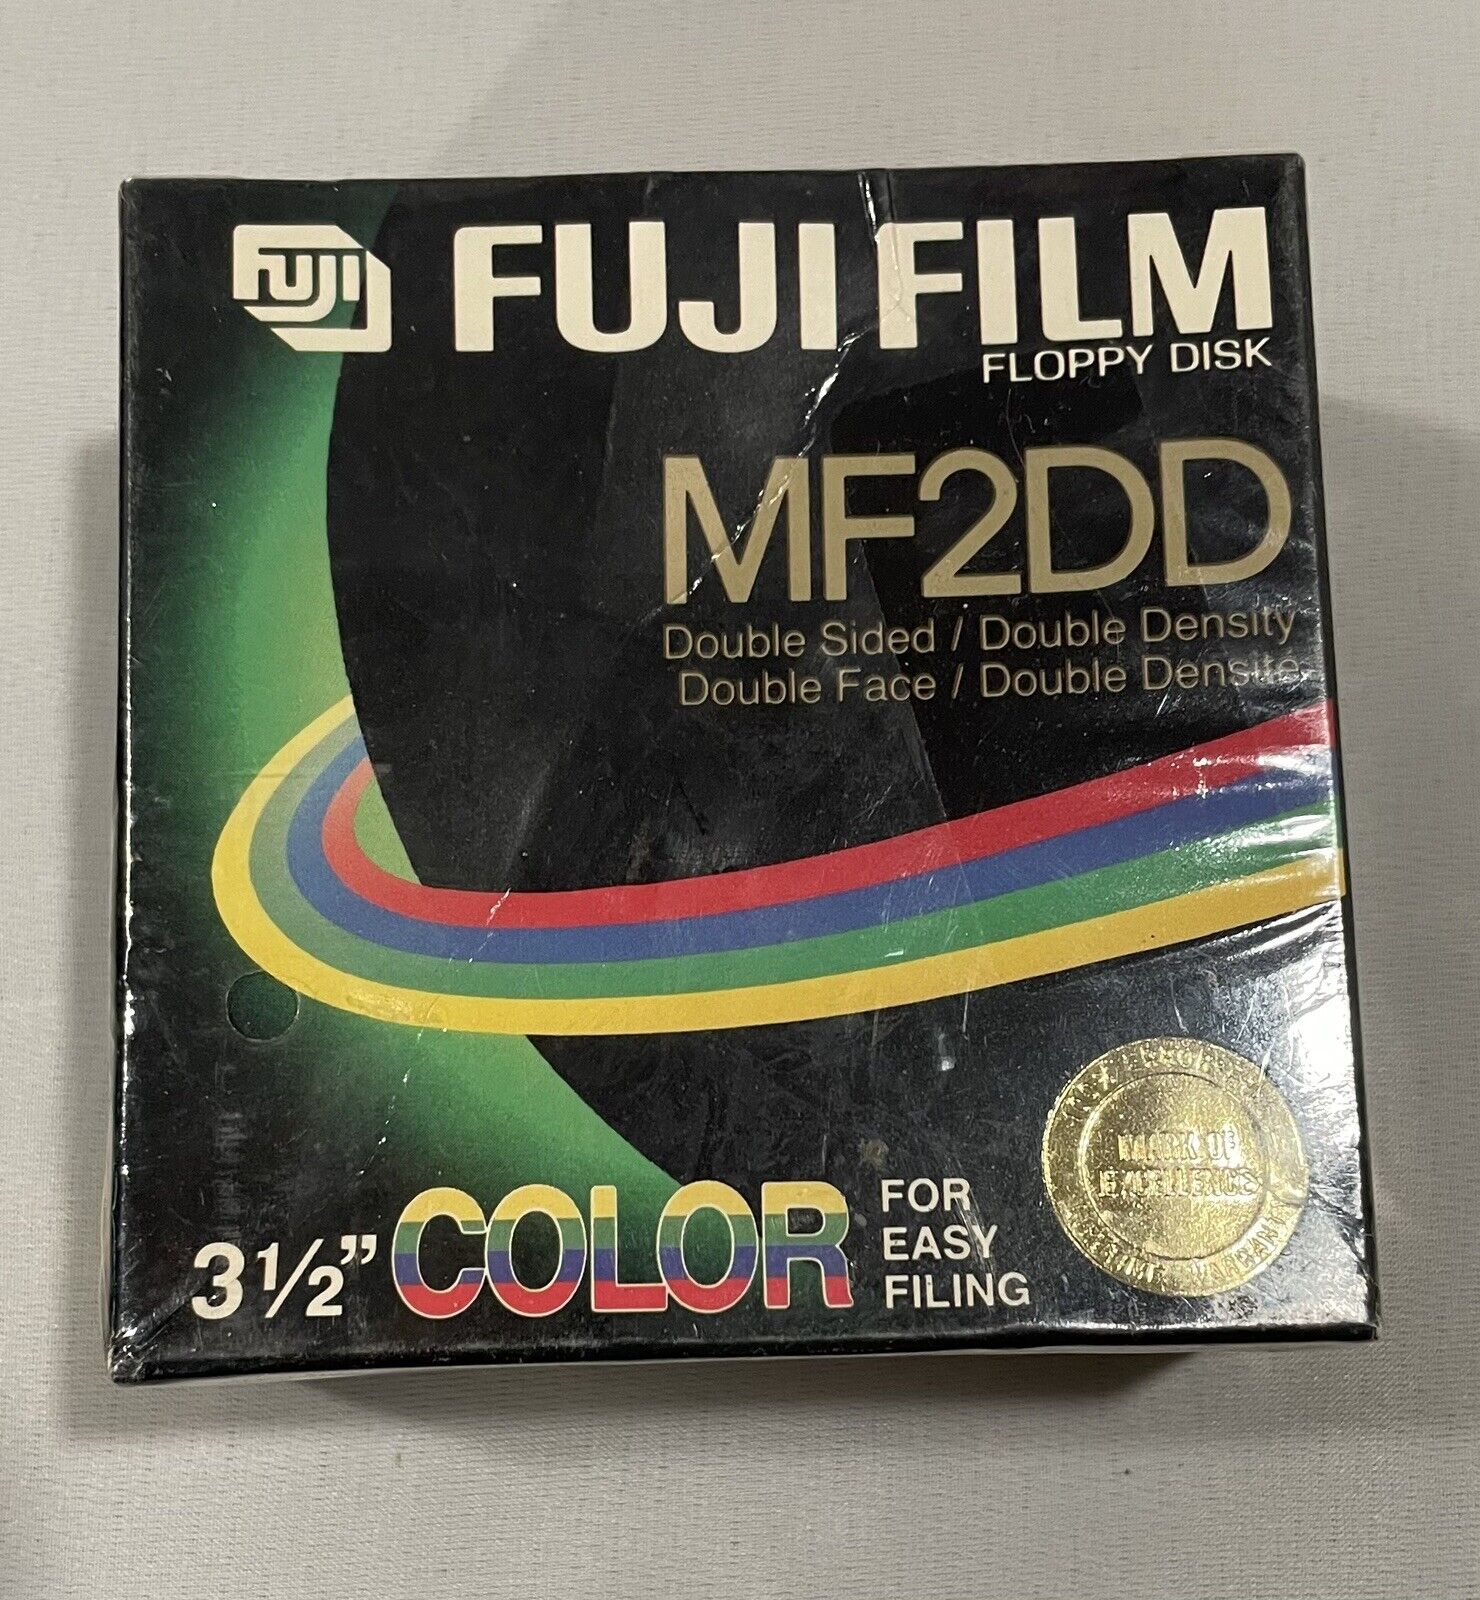 Fujifilm SEALED MF2DD Double Sided Double Density Floppy Disks Color 3 1/2” 10X